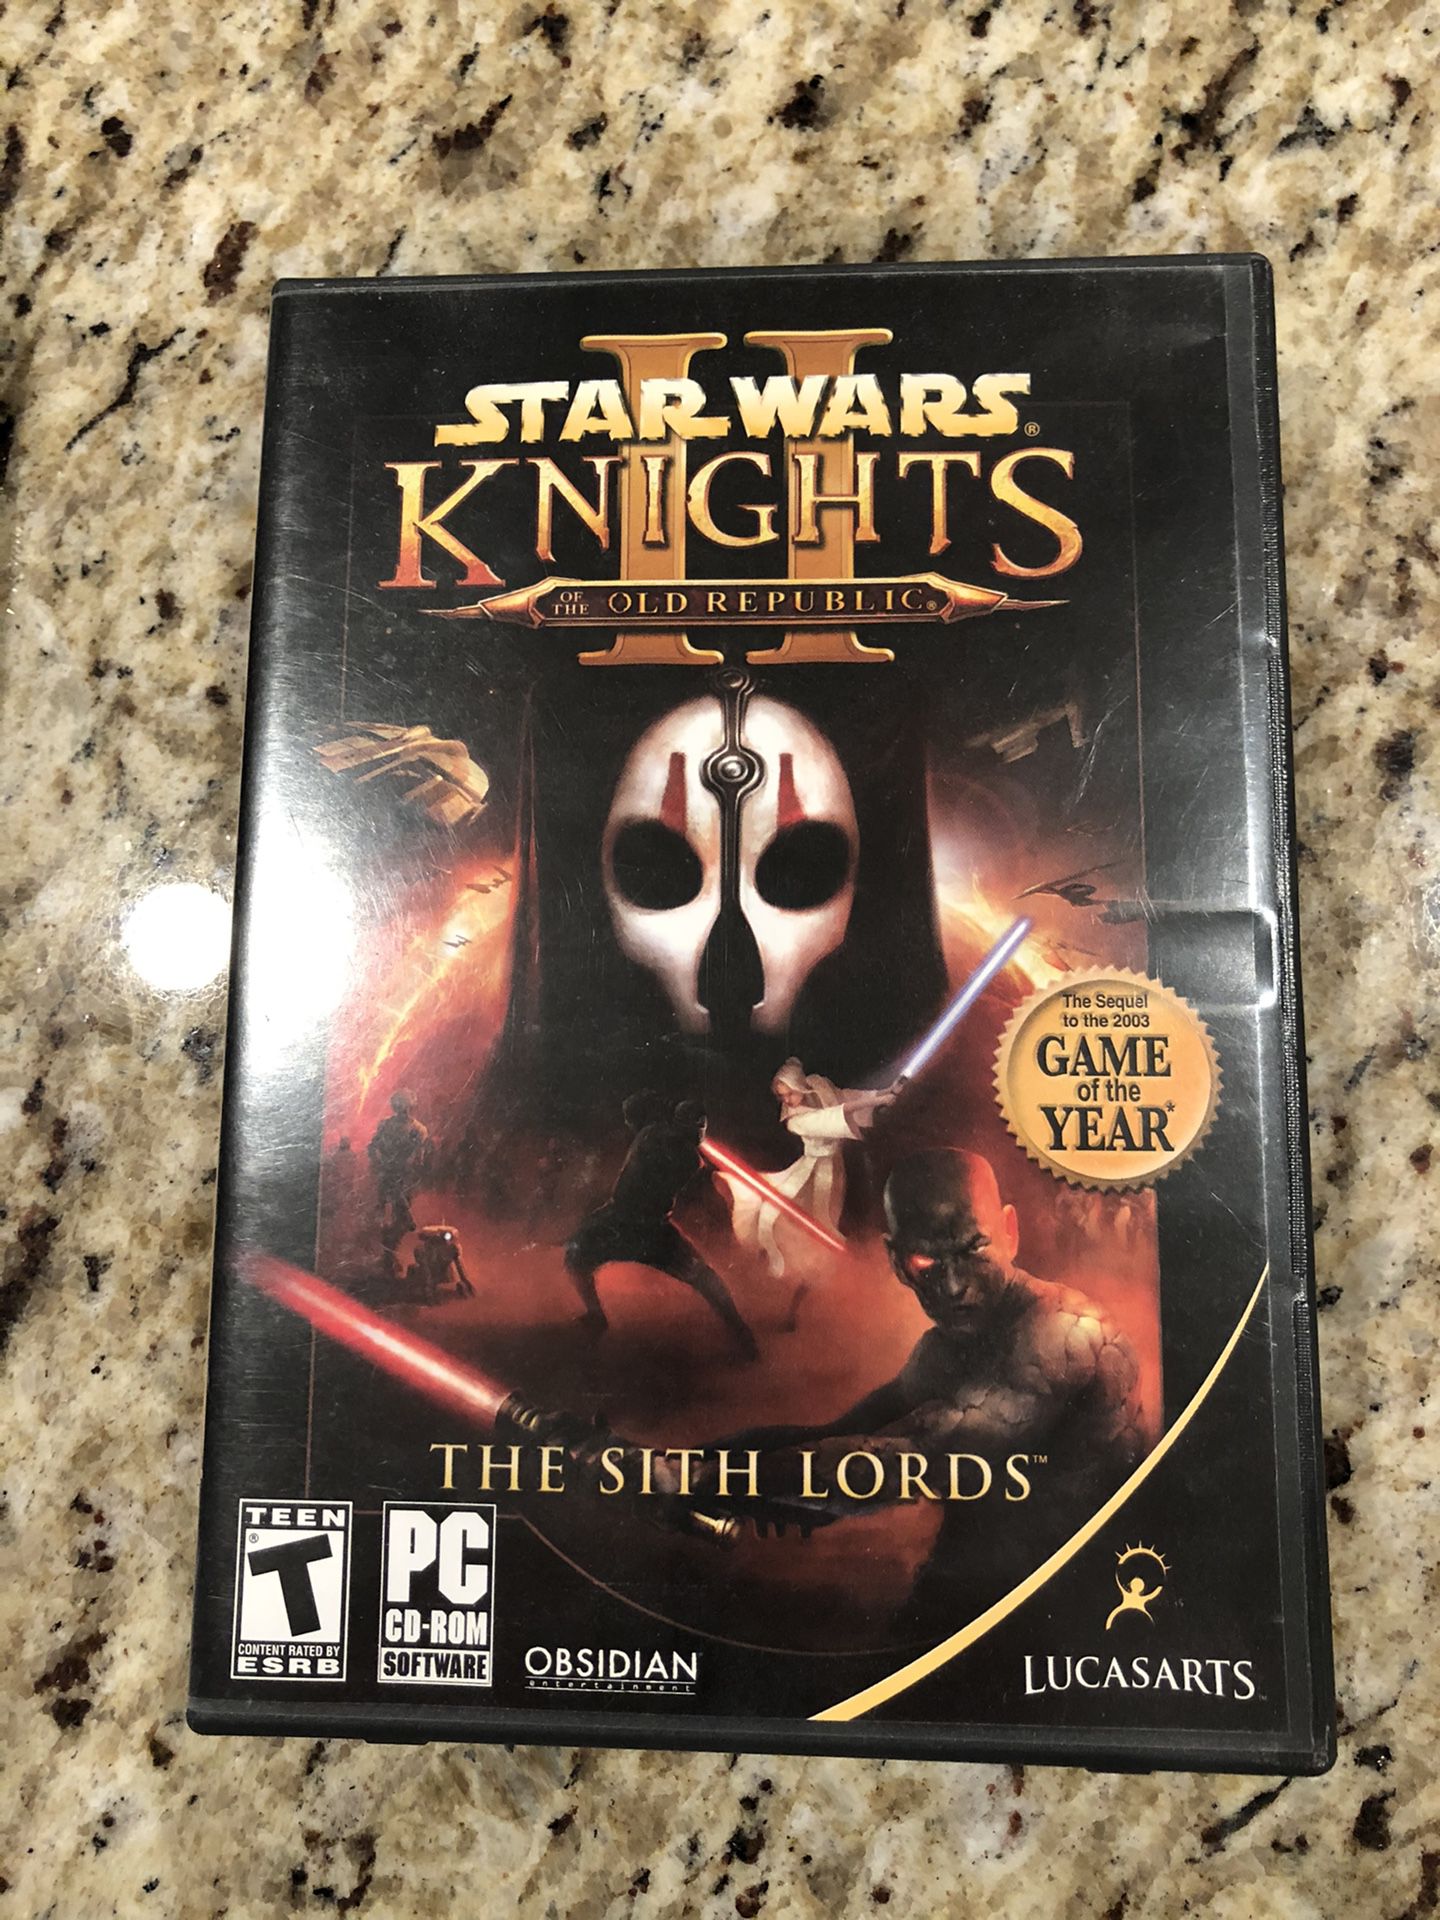 Star Wars Knights of the Old Republic PC game